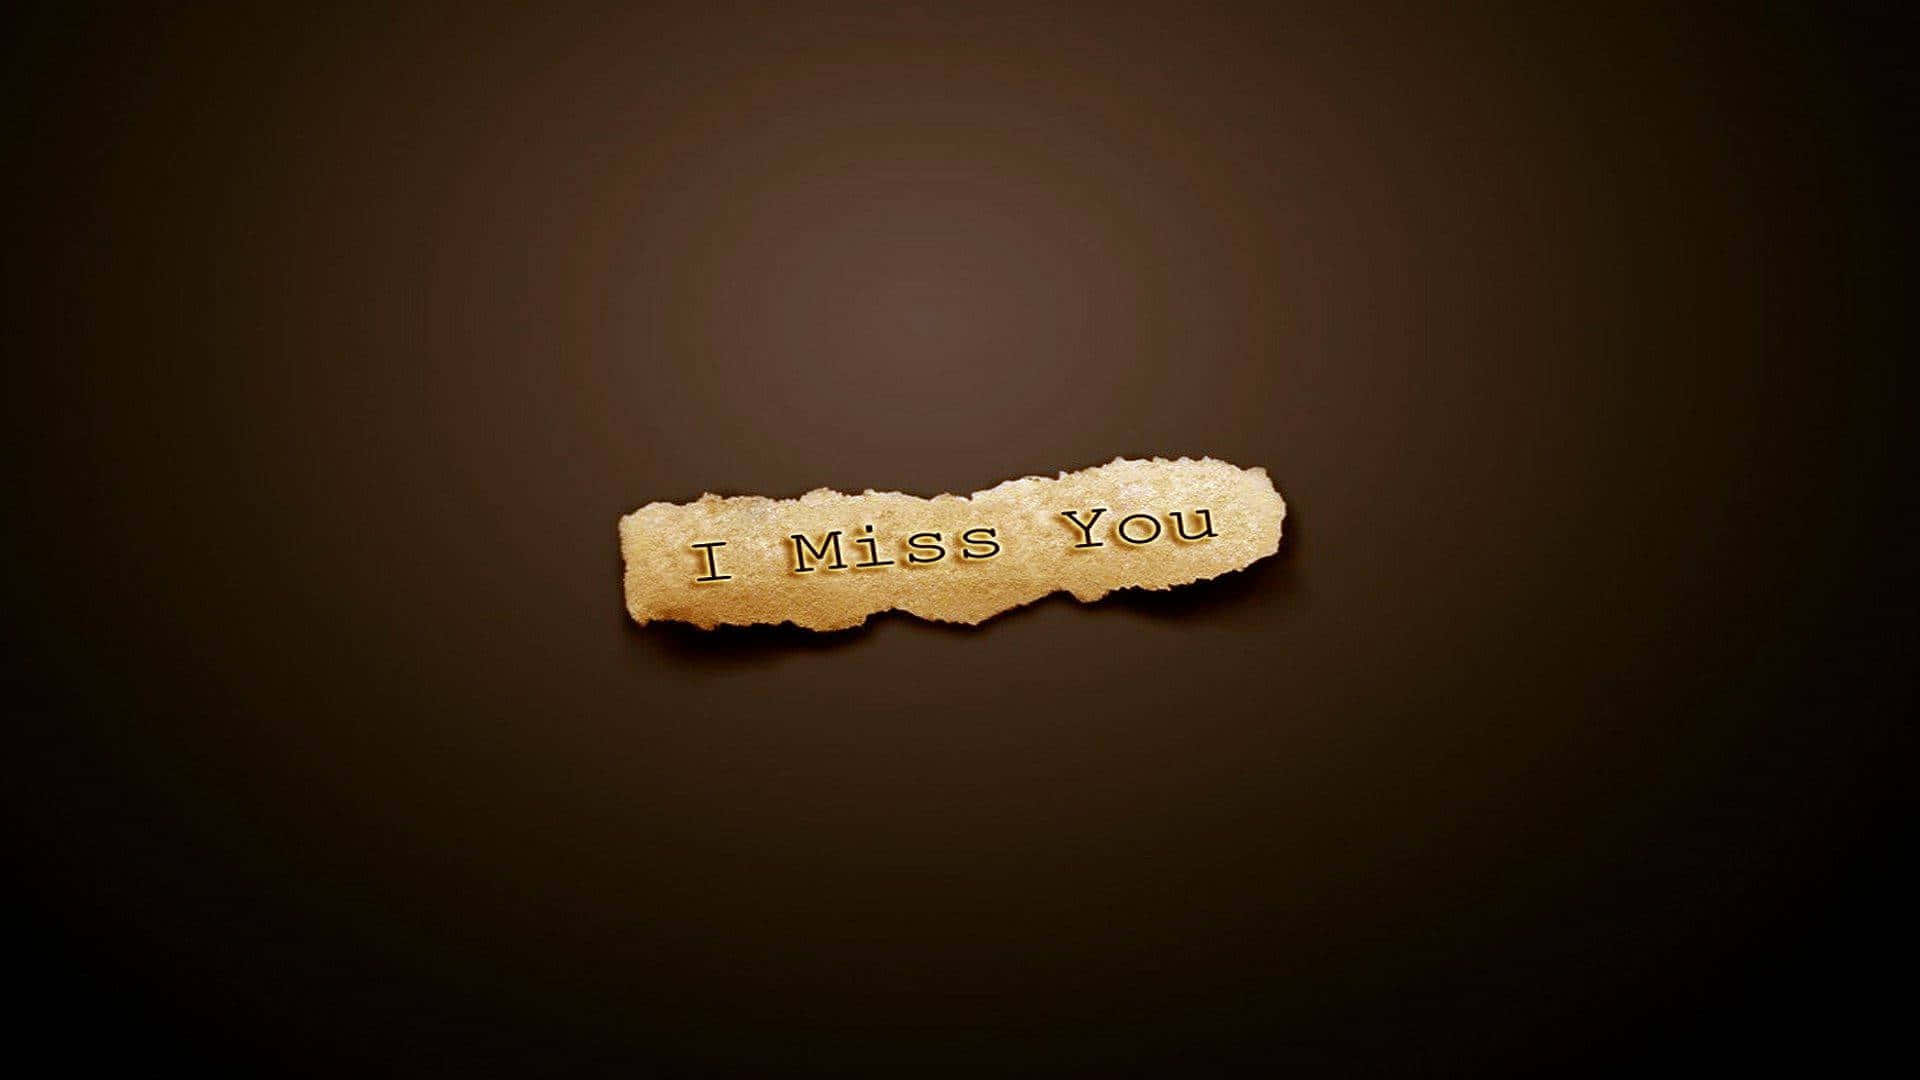 A heartfelt "I Miss You" written on a sandy beach with a setting sun in the background